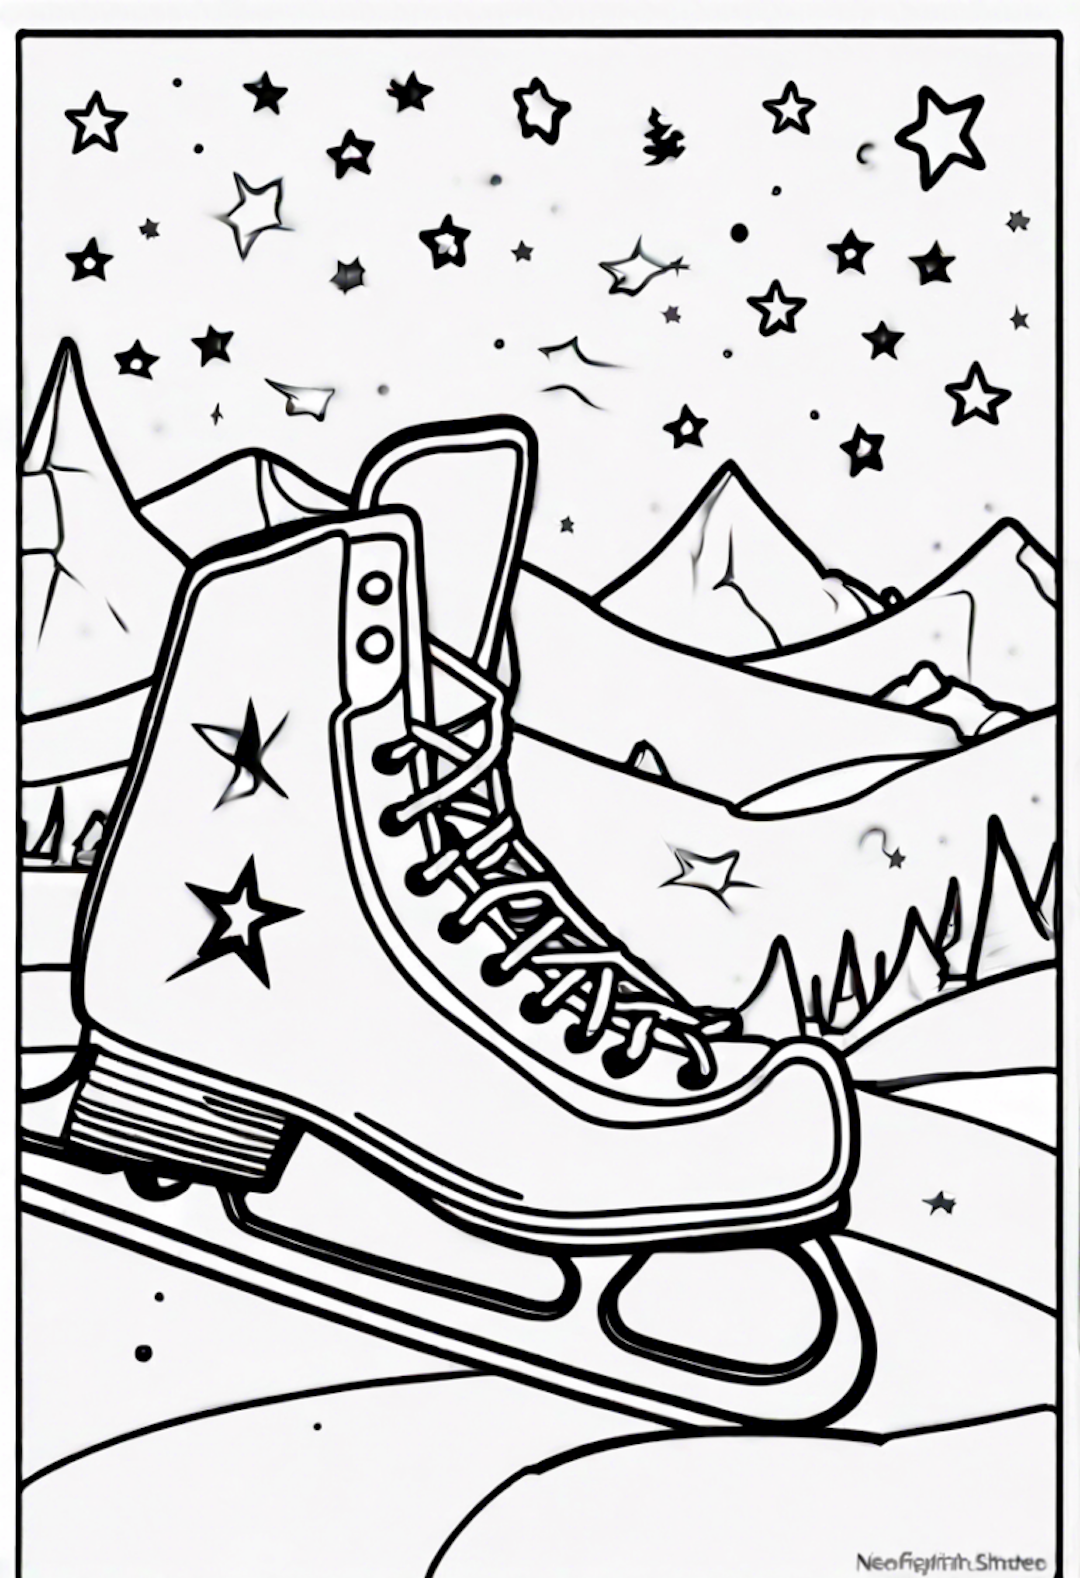 Starry Ice Skating Adventure coloring pages